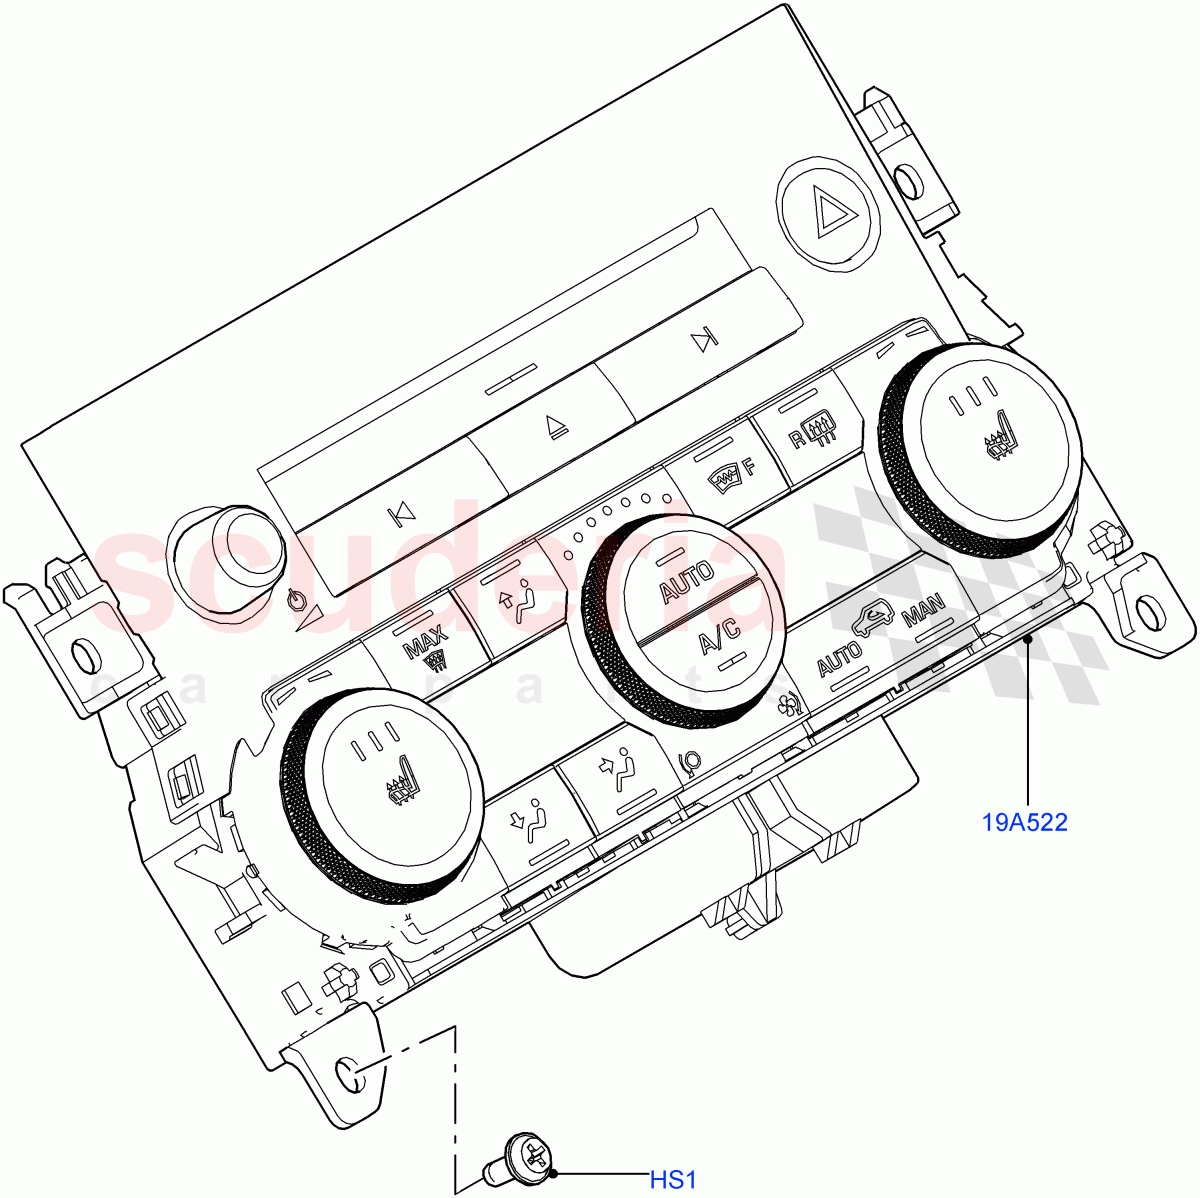 Heater & Air Conditioning Controls(Changsu (China))((V)FROMEG000001) of Land Rover Land Rover Range Rover Evoque (2012-2018) [2.0 Turbo Diesel]